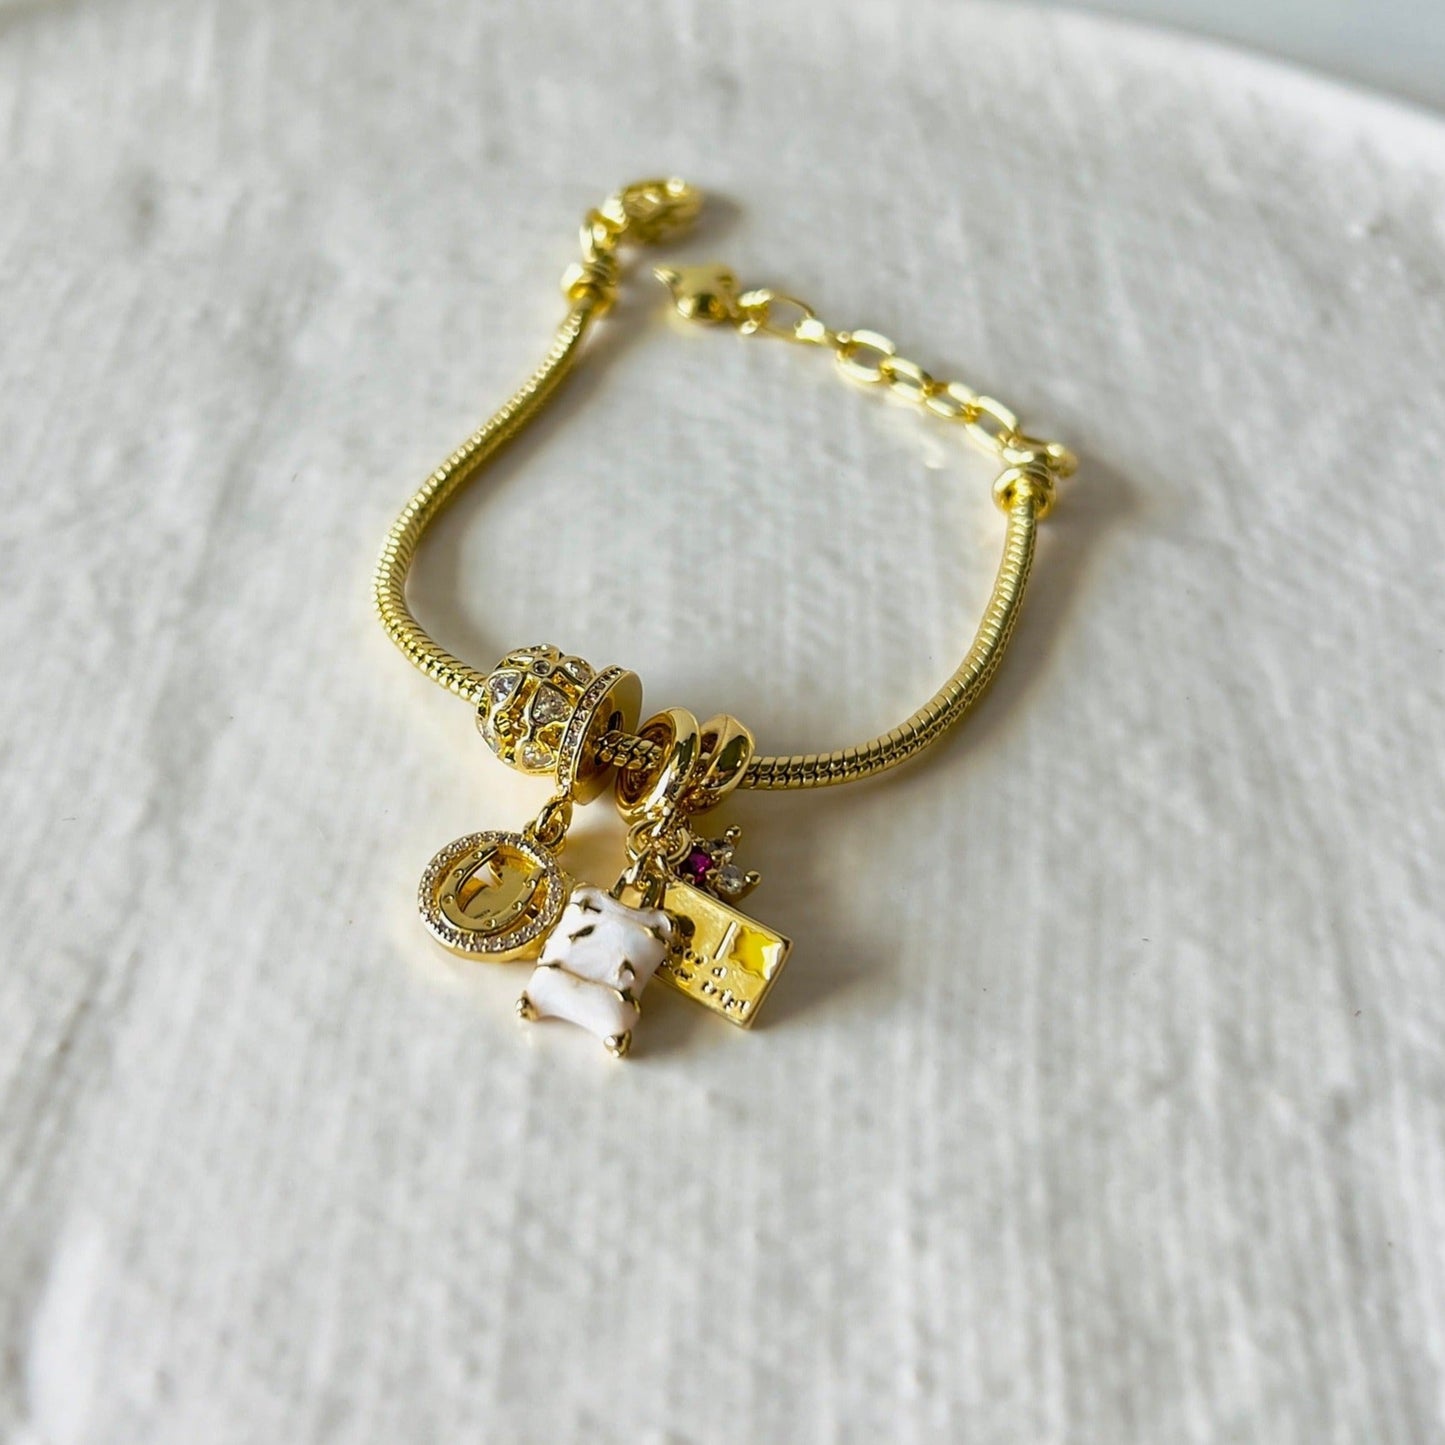 pandora dupe bracelet in gold, high end good quality perfect for gifts for women